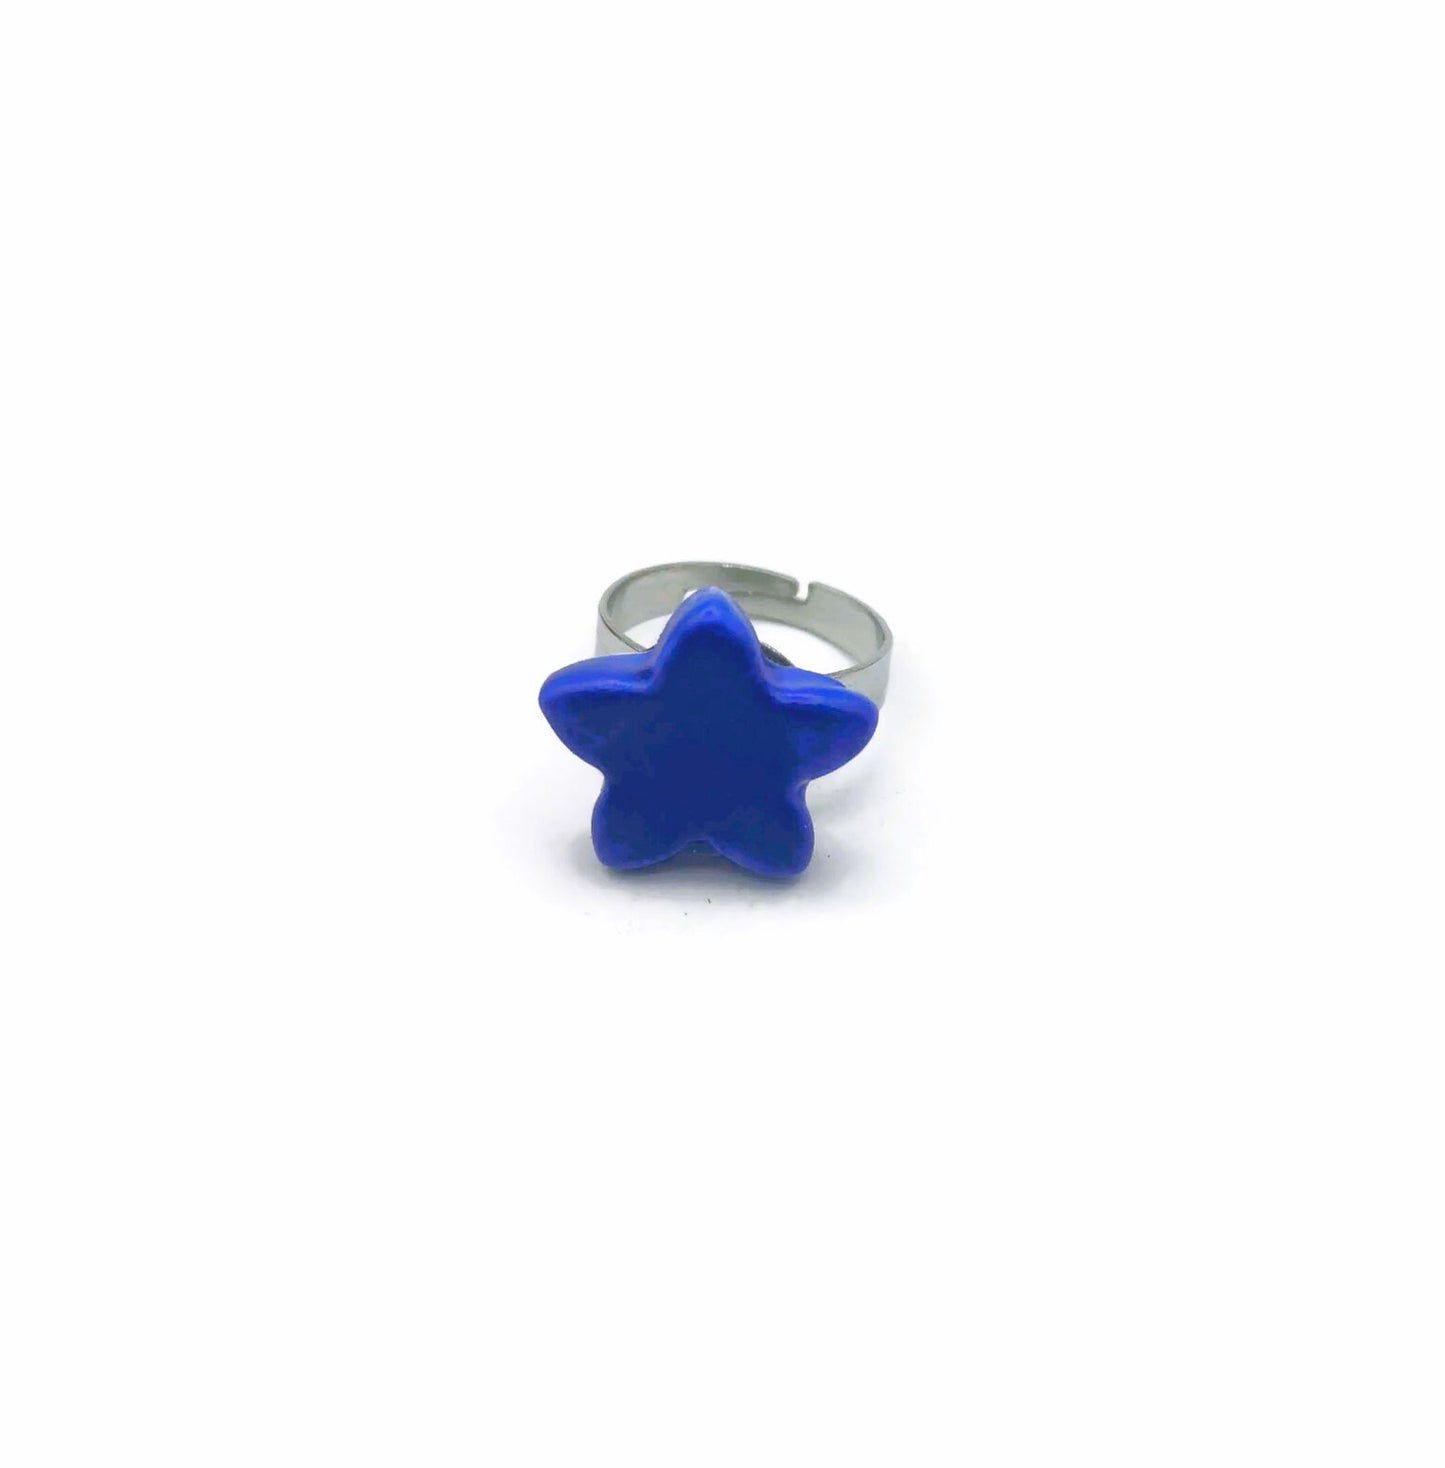 Handmade Ceramic Blue Star Statement Ring For Women, Stainless Steel Adjustable Ring, Porcelain Best 9th Anniversary Gifts For Her - Ceramica Ana Rafael